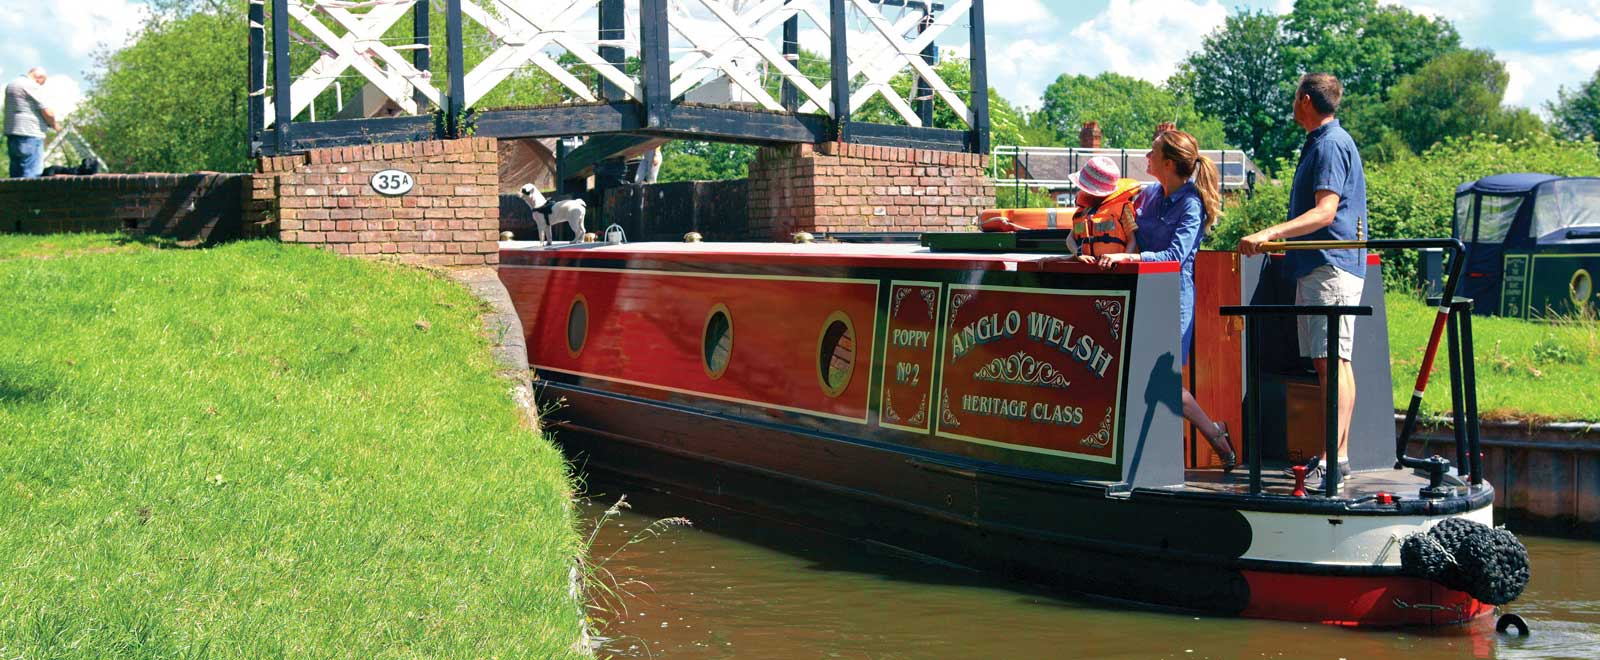 Can You Drink And Drive a Canal Boat Uk 